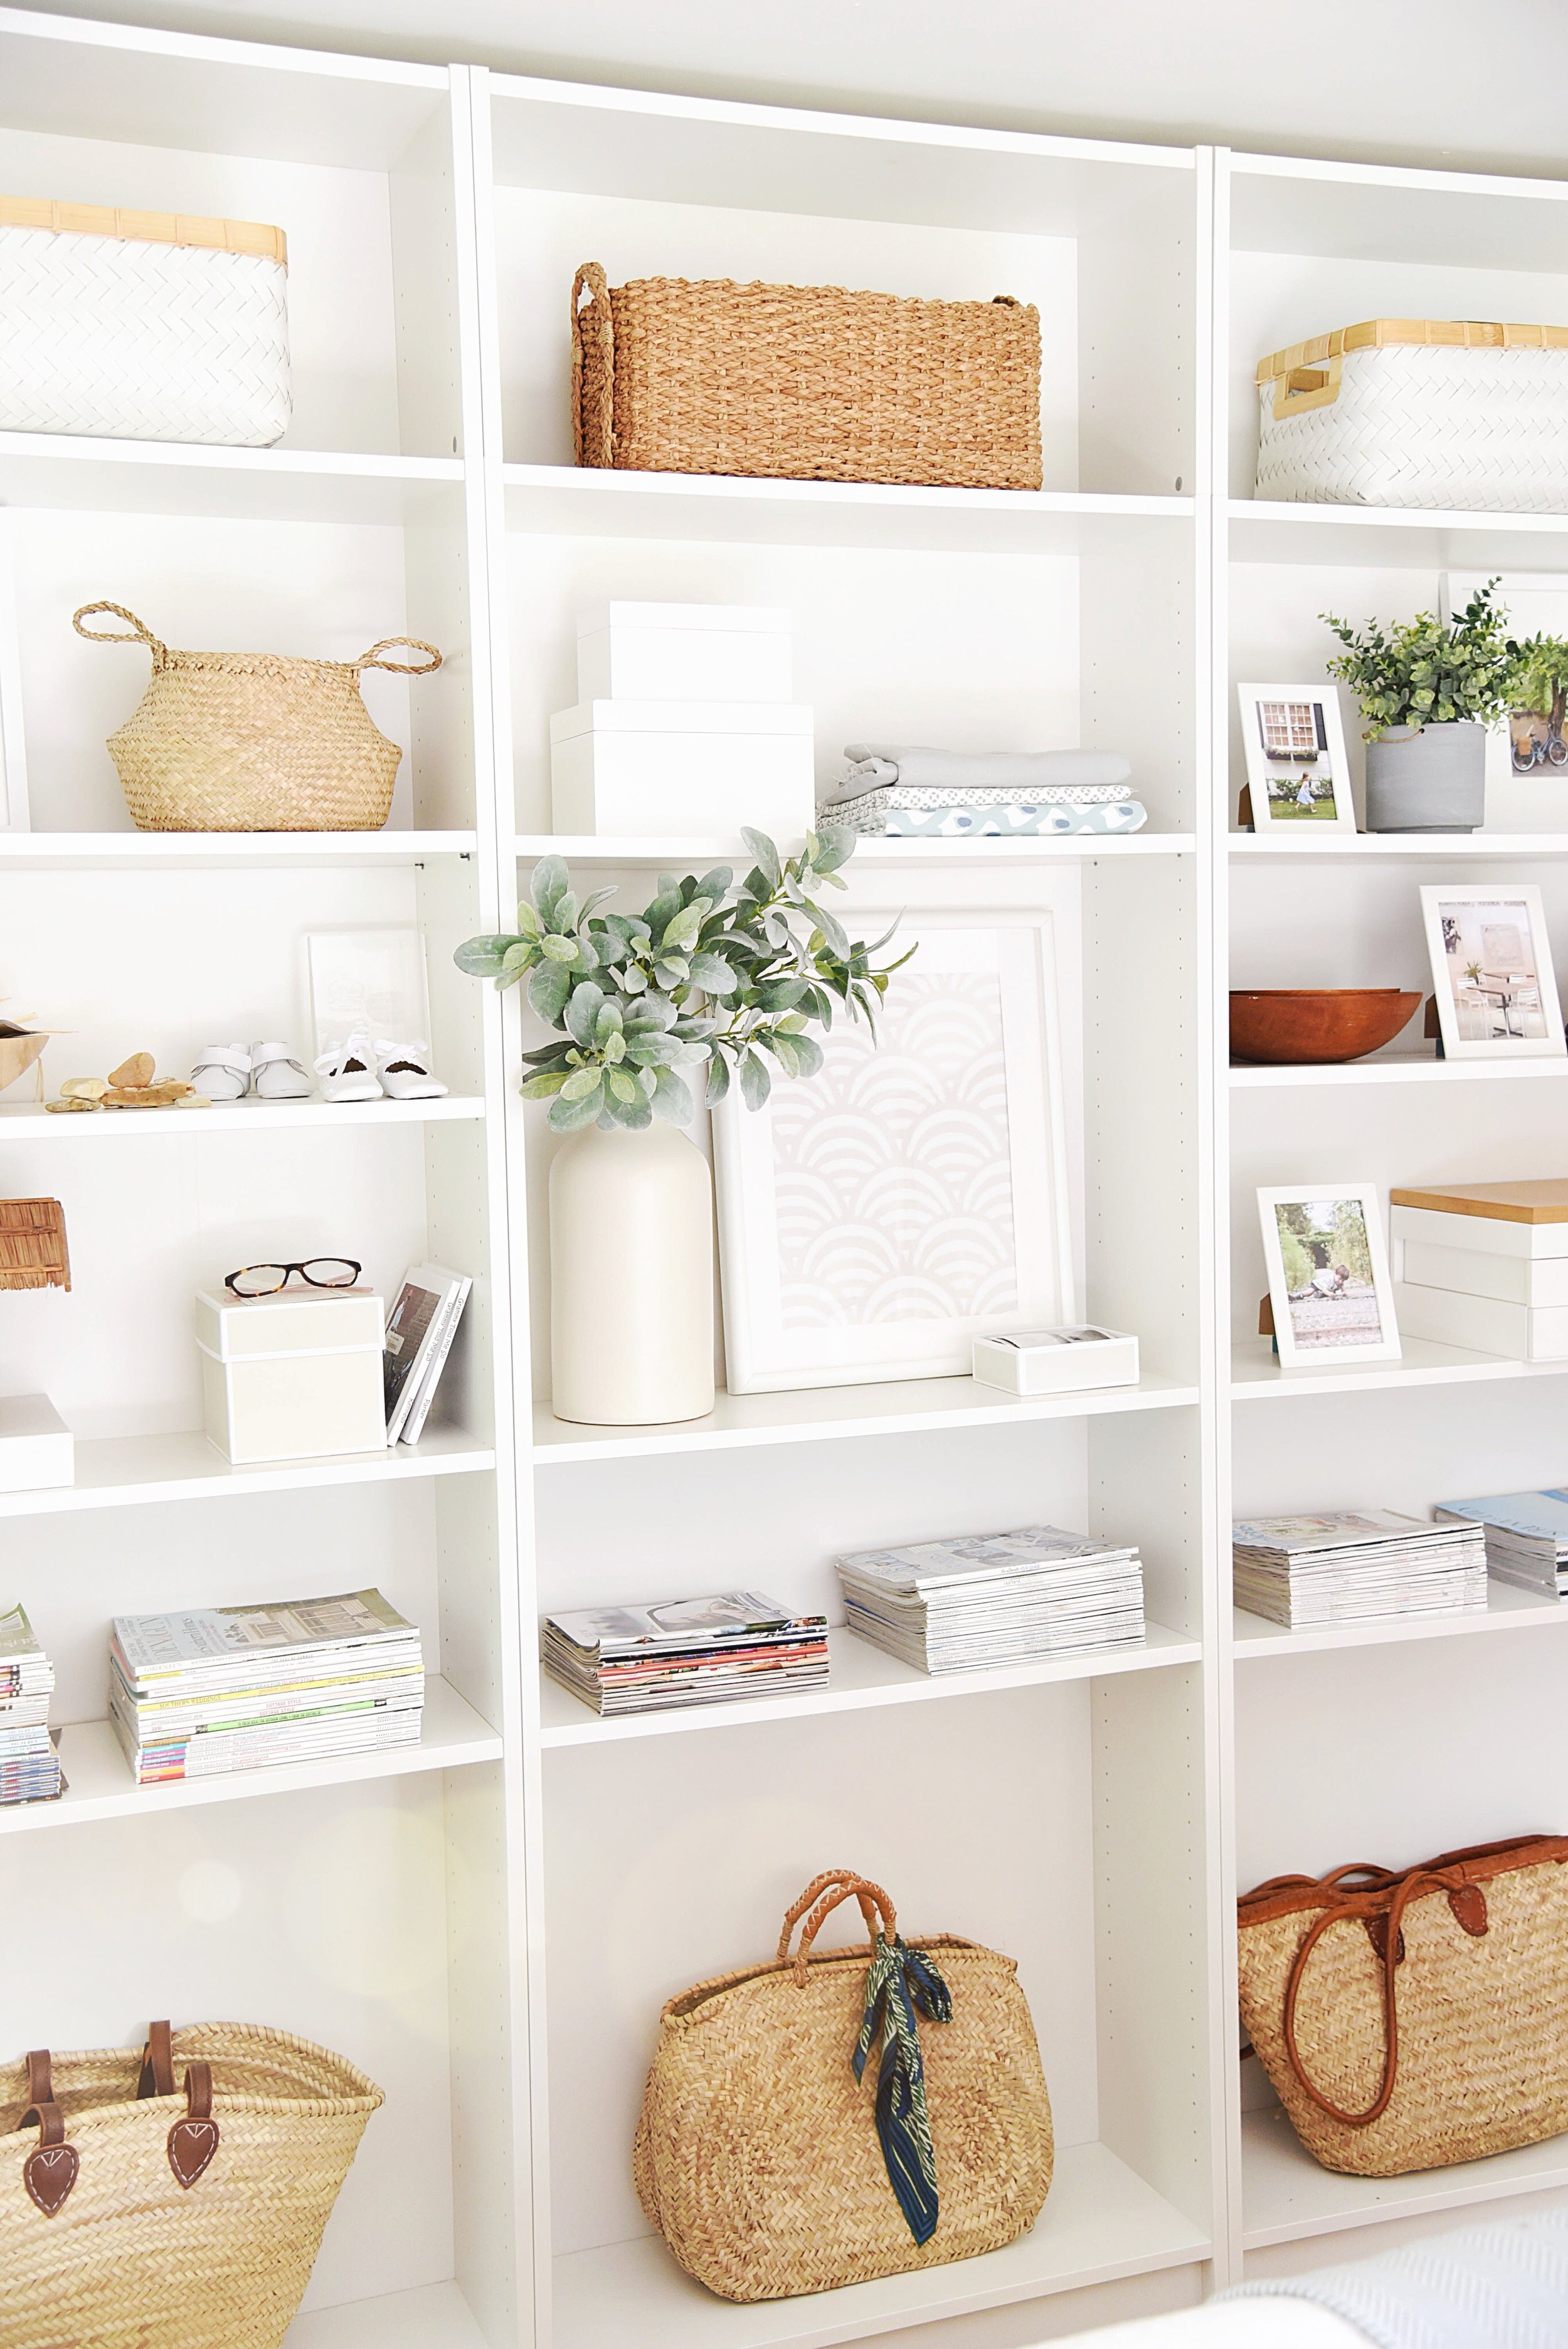 bookshelf+styling+_+11+tips+&+tricks+for+what+to+display+and+how+to+style+it+by+@michellecannonsmith.jpg